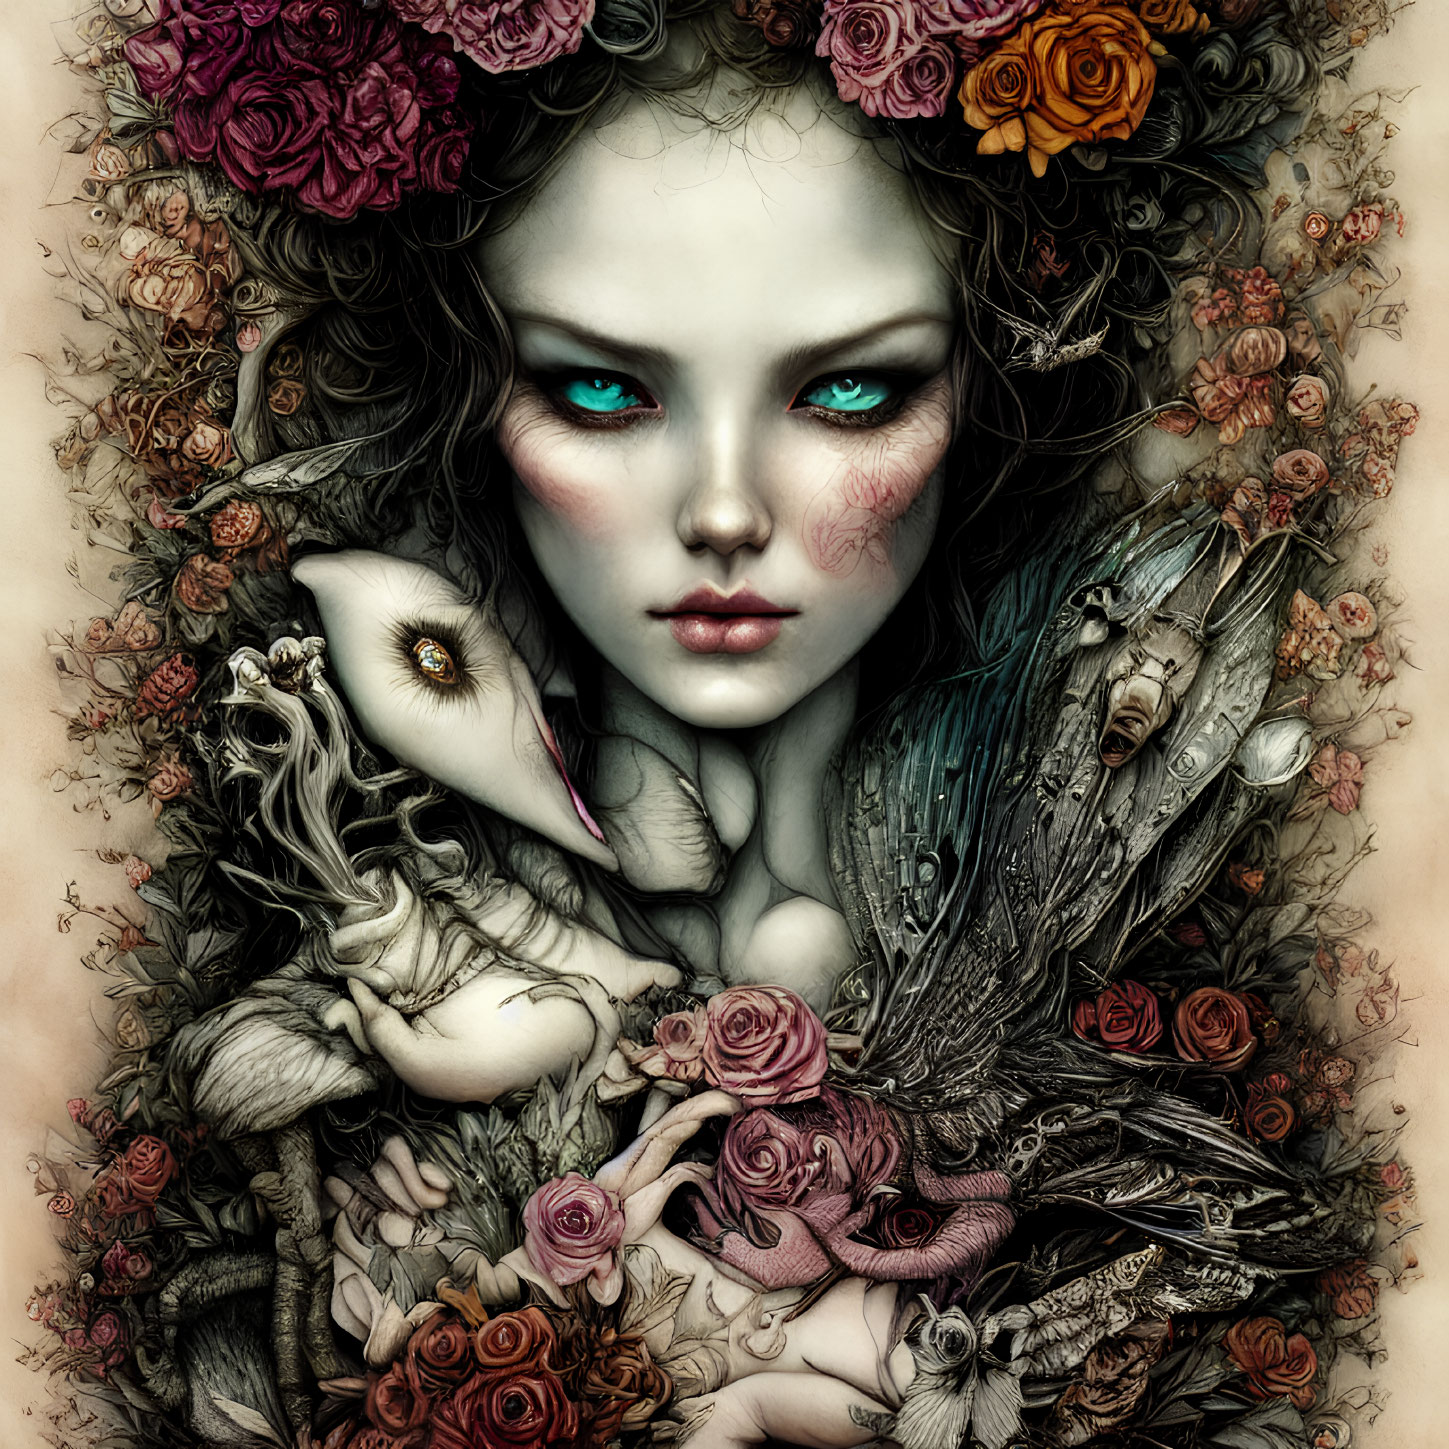 Pale woman with blue eyes in fantasy artwork with roses and fairy